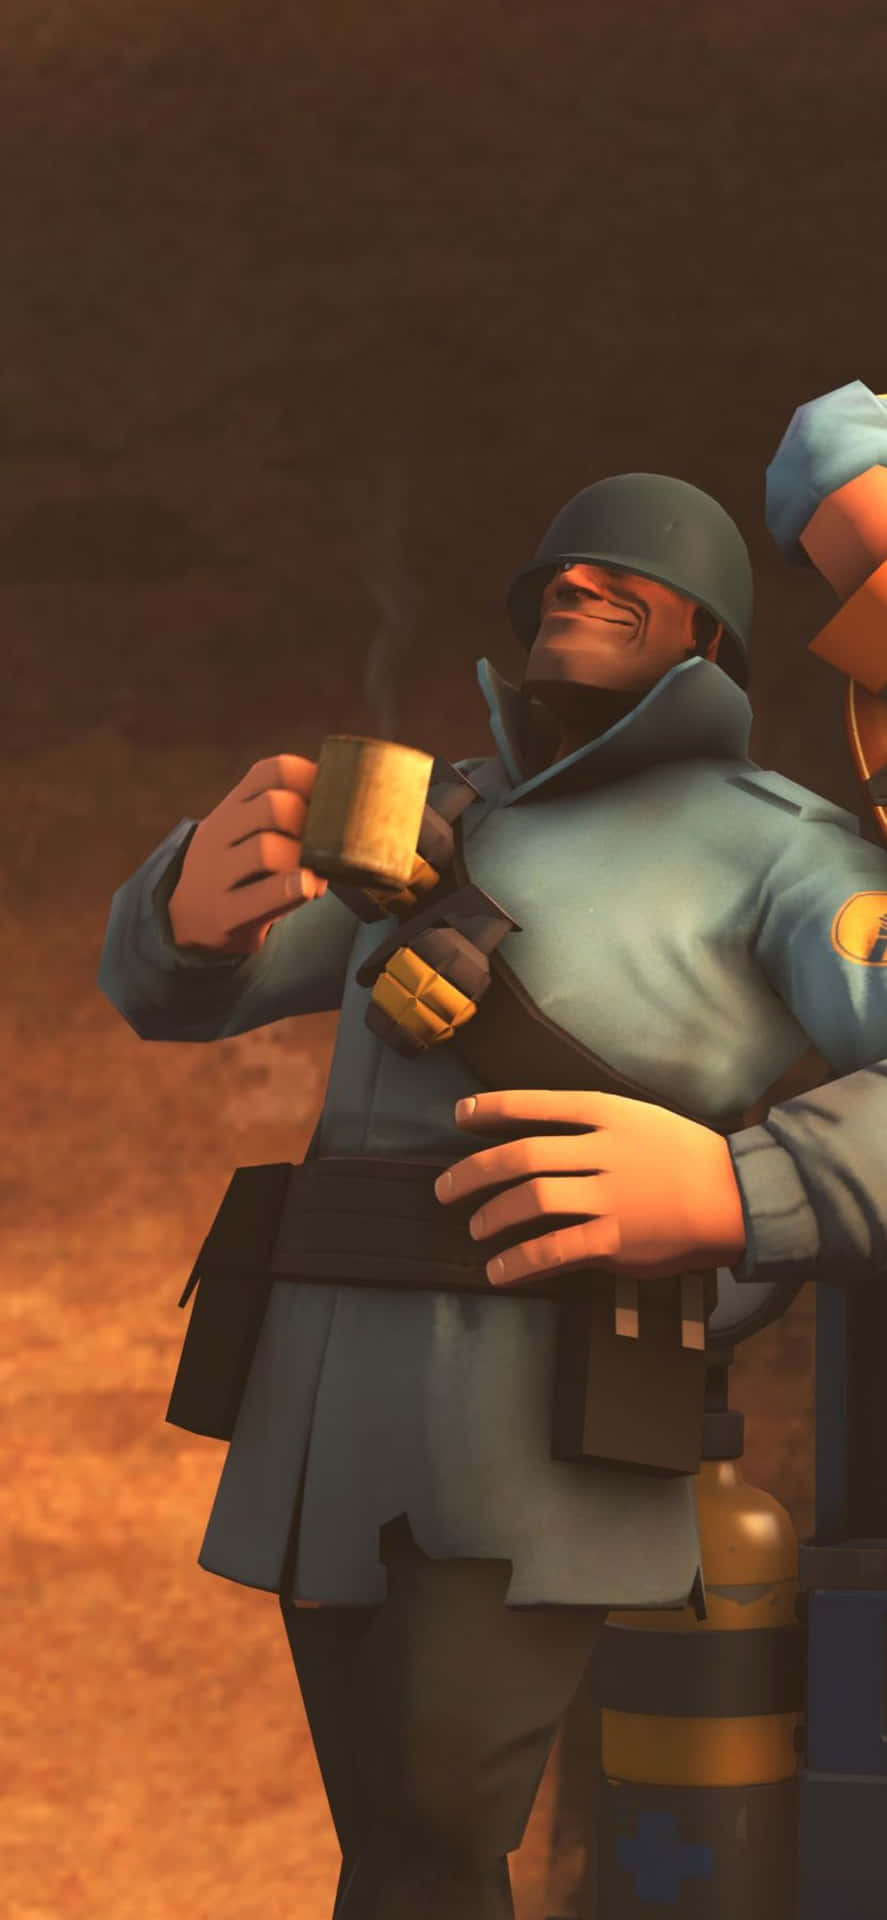 iPhone XS Team Fortress 2 Blue Soldier Background